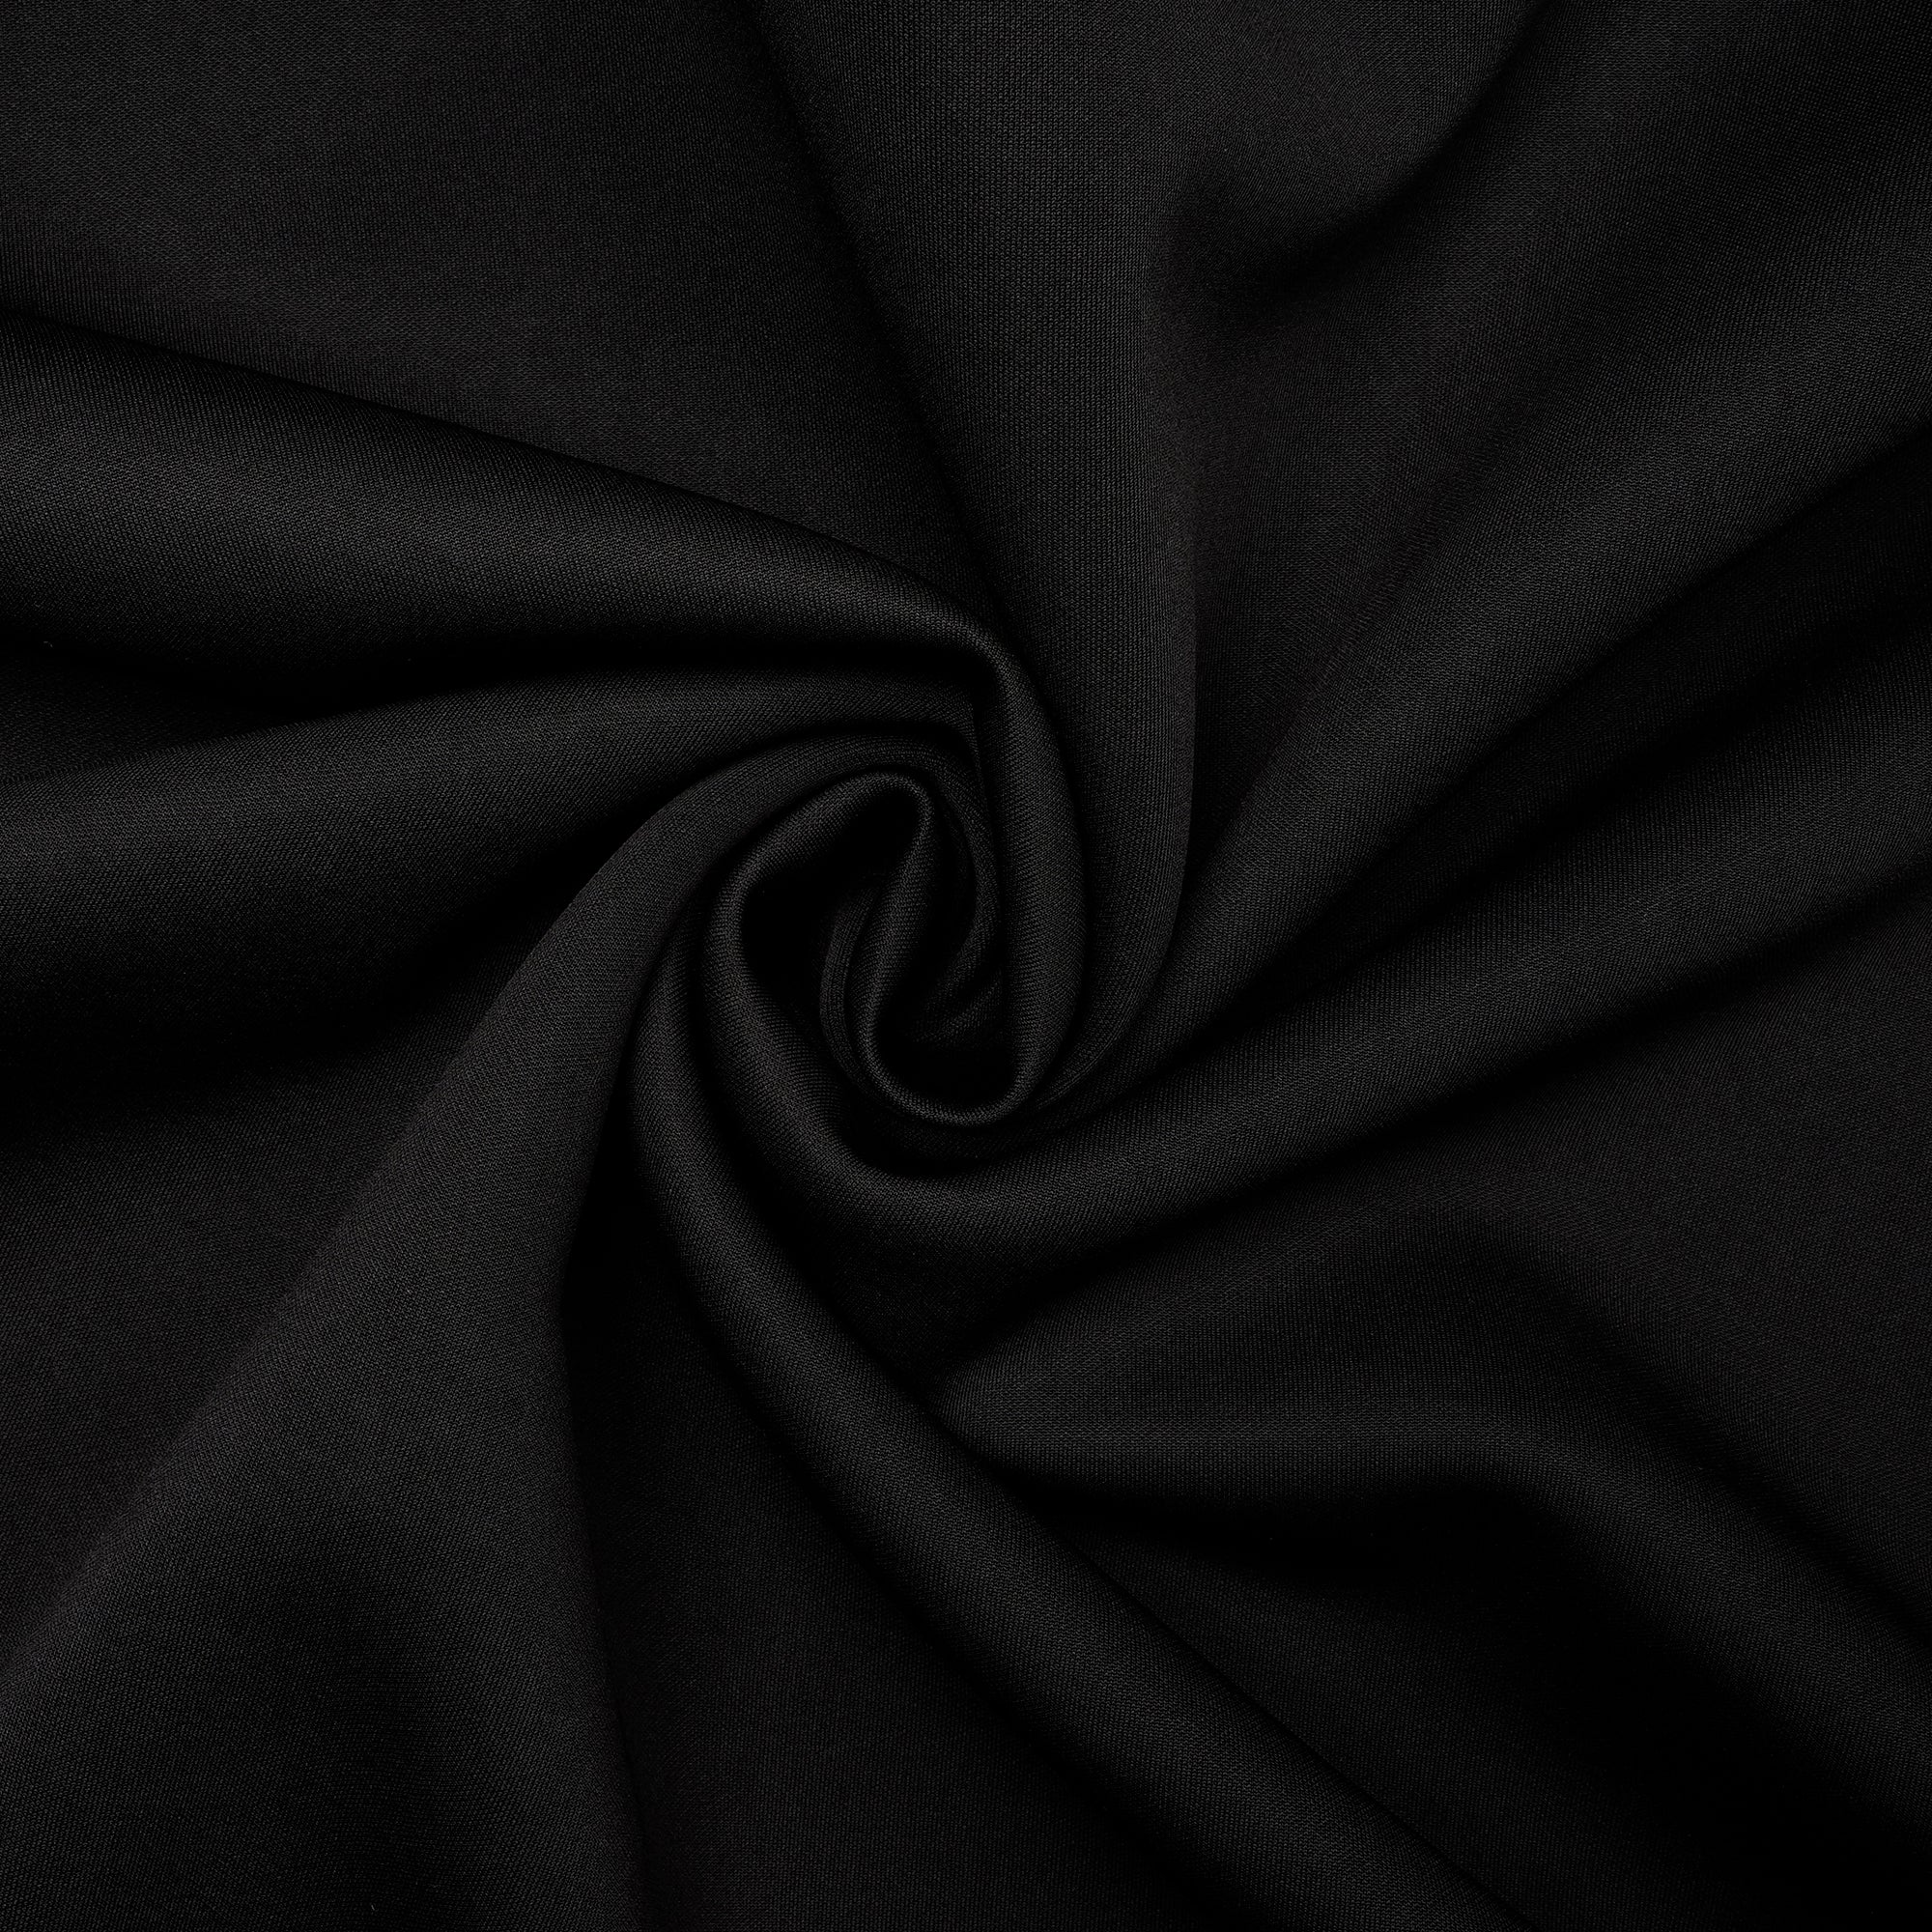 Black Solid Dyed Imported Neoprene Fabric (60" Width)